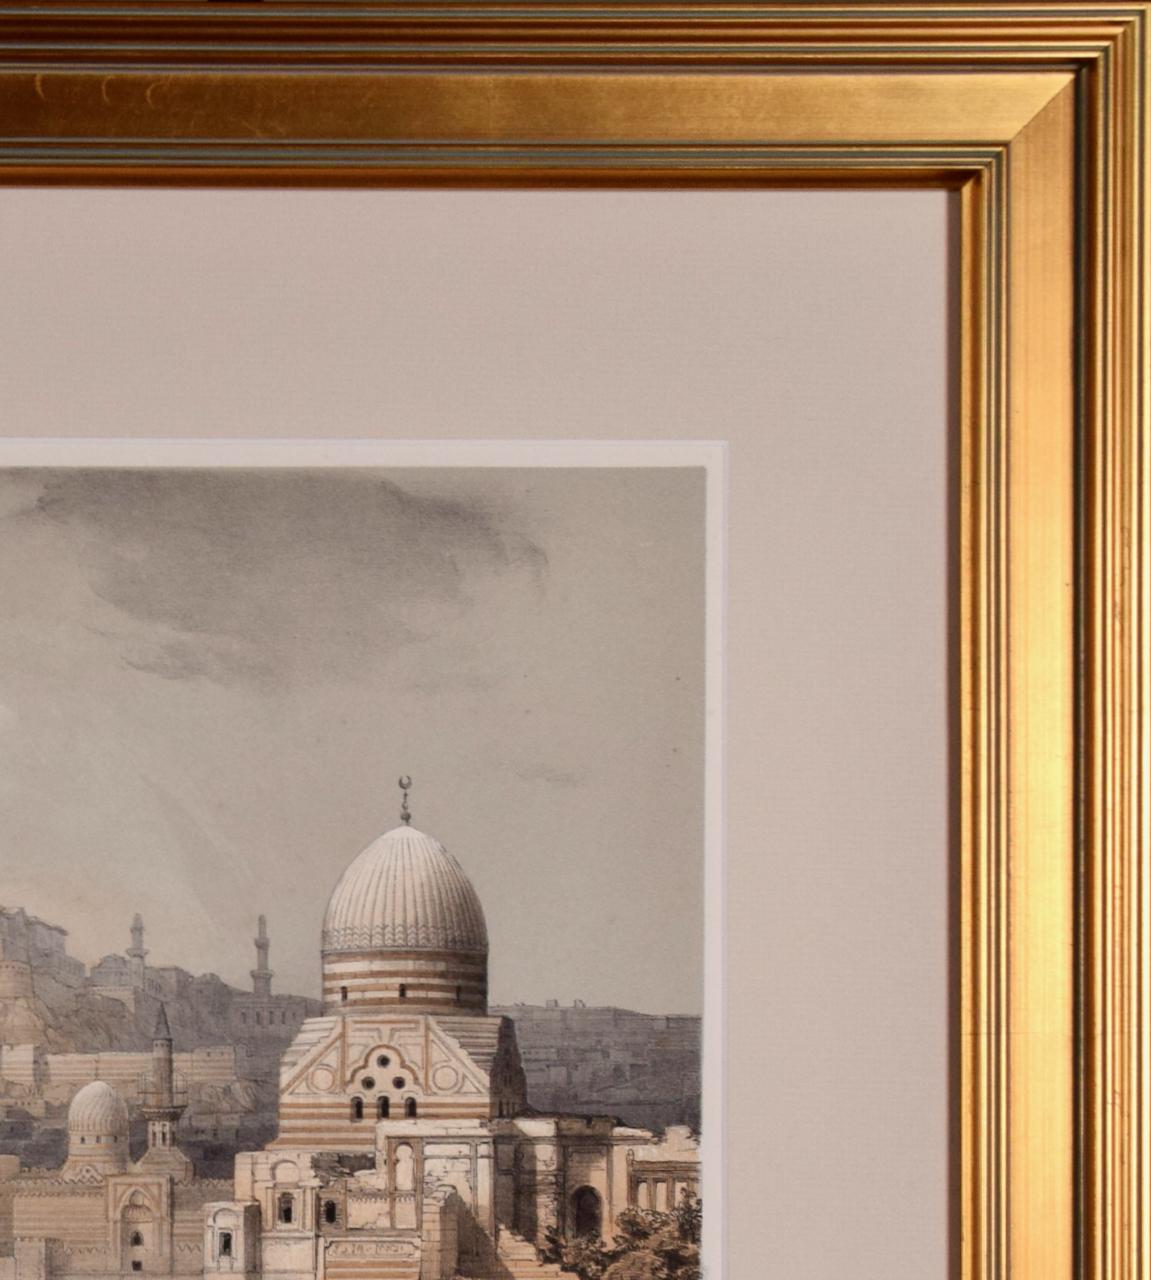 The Citadel of Cairo: 19th C. Hand-colored Roberts Lithograph - Brown Landscape Print by David Roberts